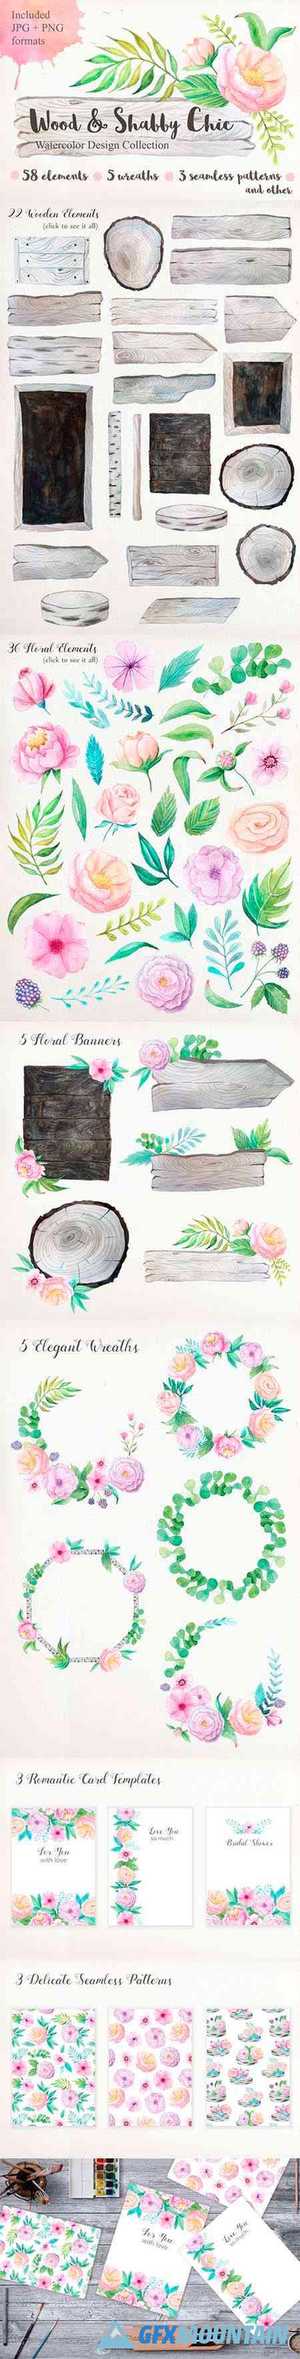 SHABBY CHIC WATERCOLOR PACK